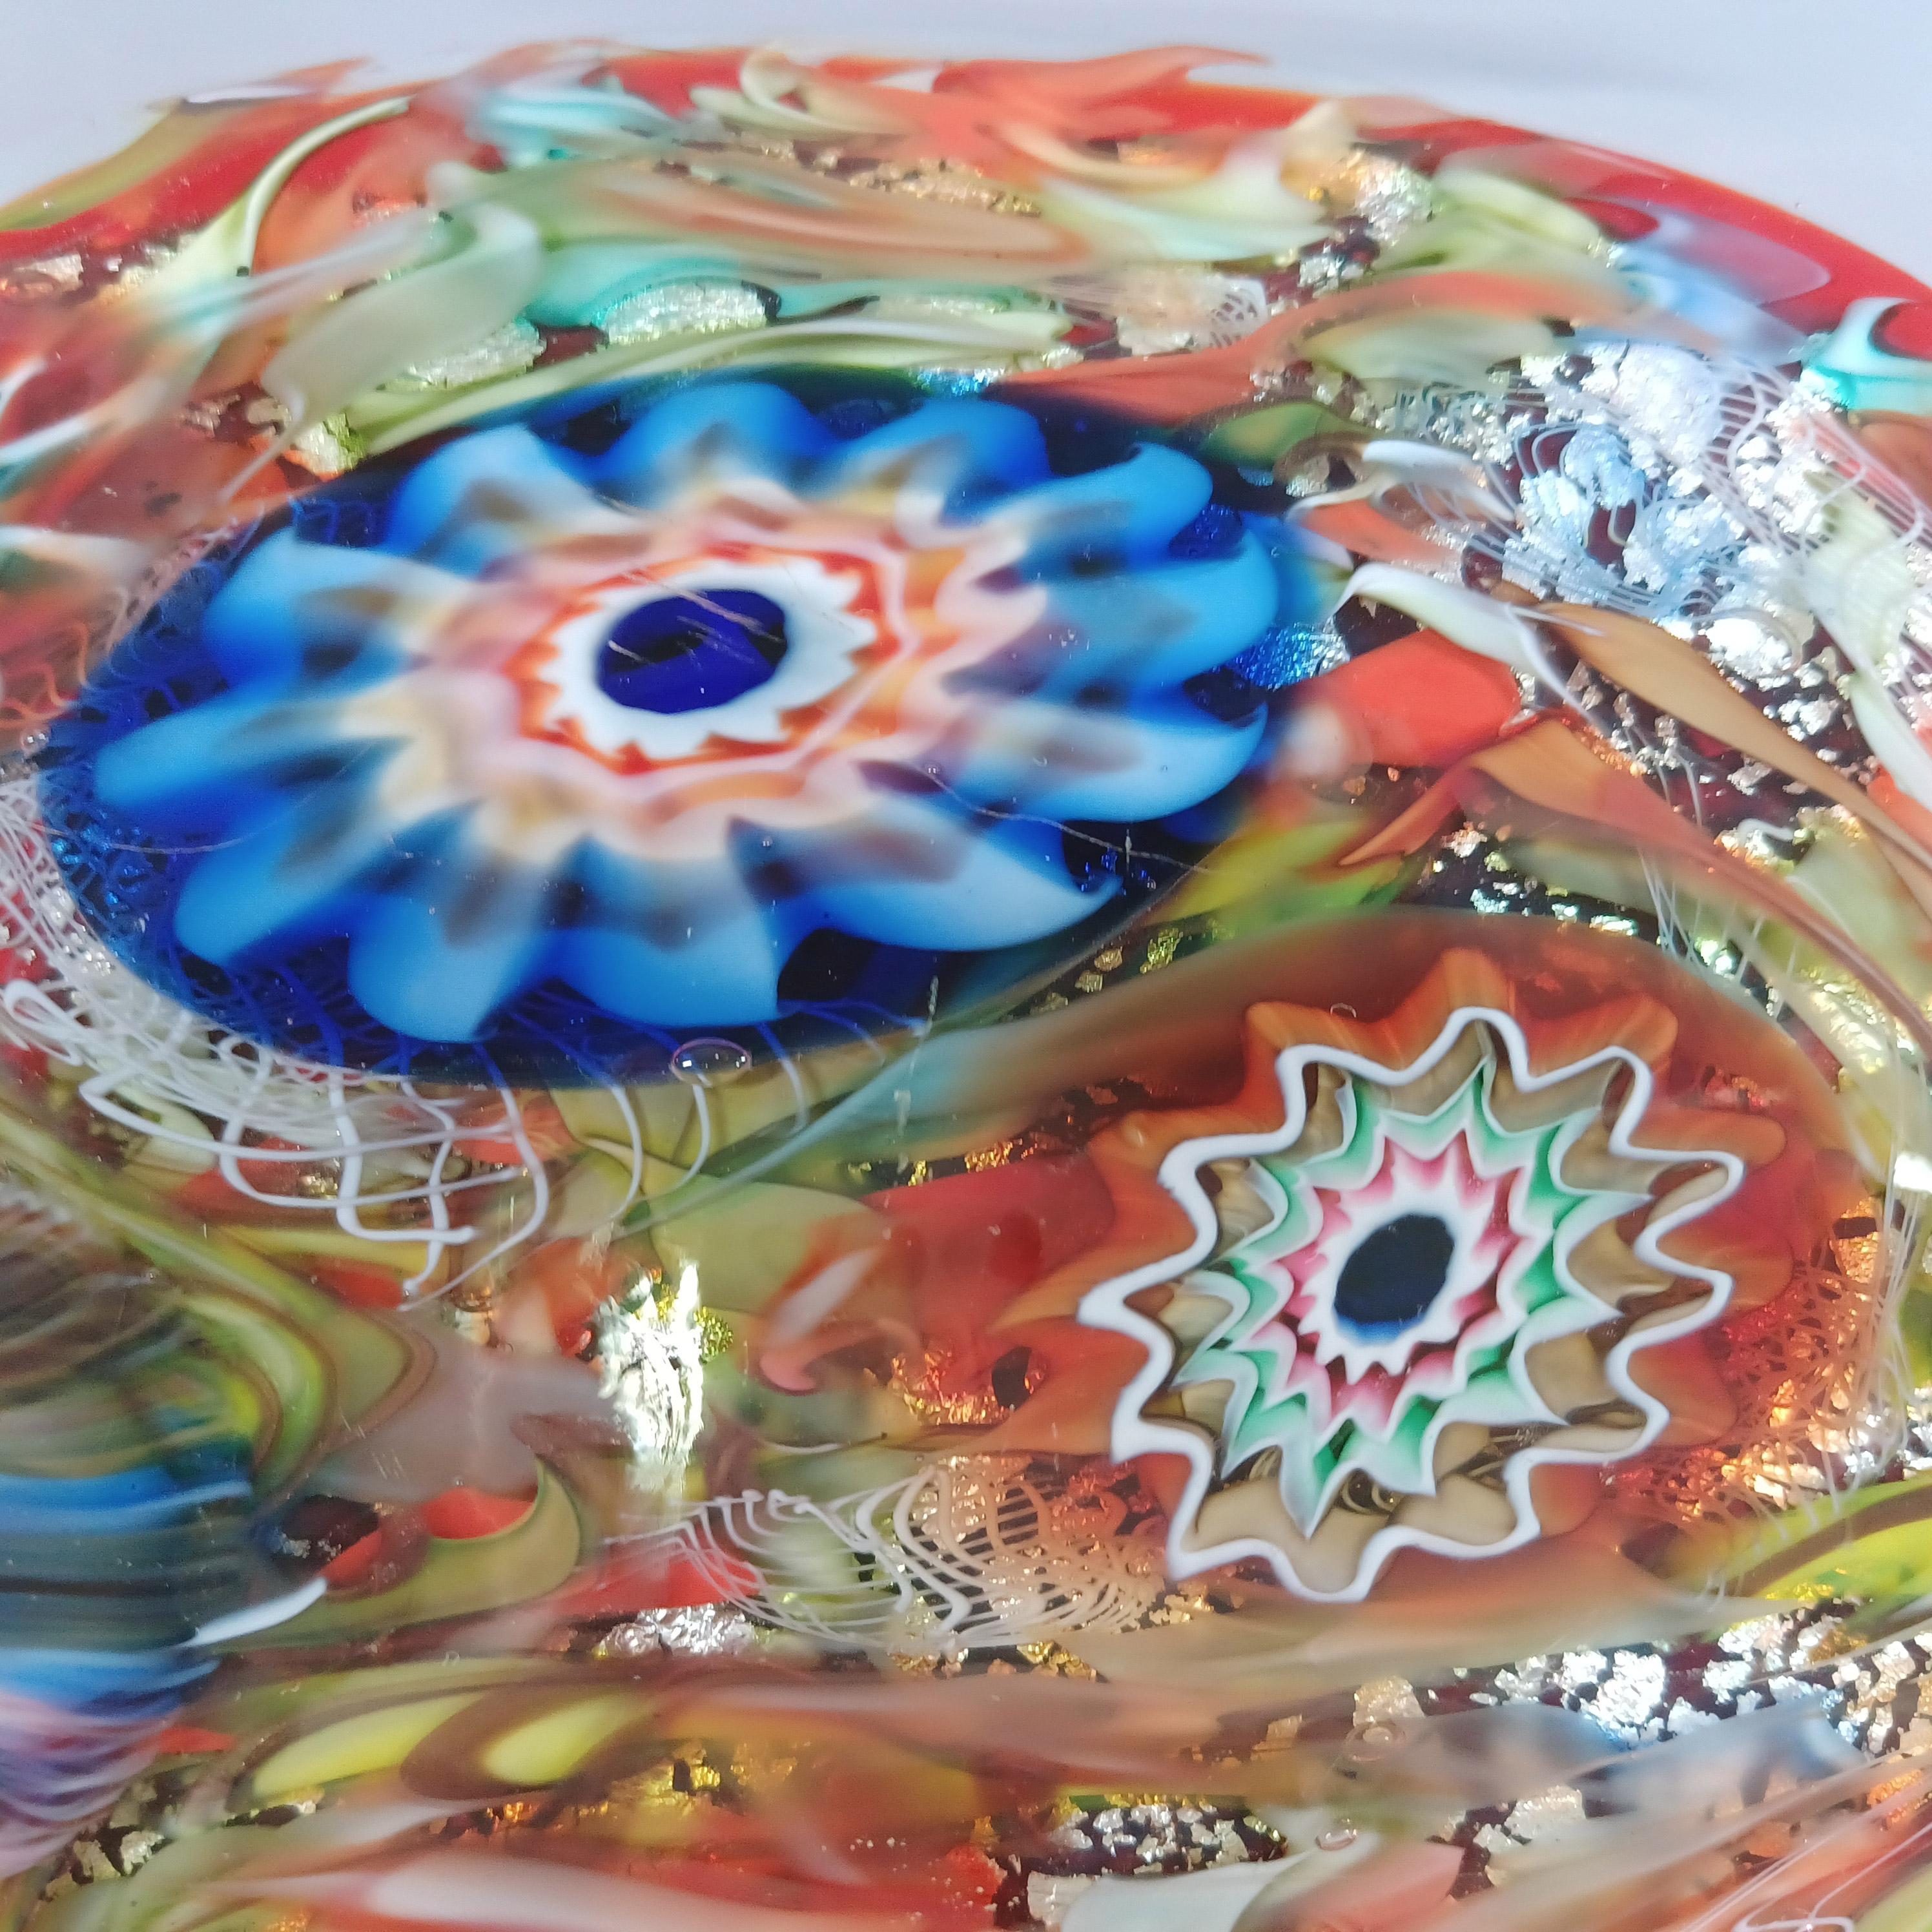 Here is a one off, rare item that you will likely never see again! A large and very heavy (2.5kg unpacked) 1950's Venetian glass sculptural slab, made on the island of Murano, near Venice, Italy. This piece was made by Galliano Ferro, and still